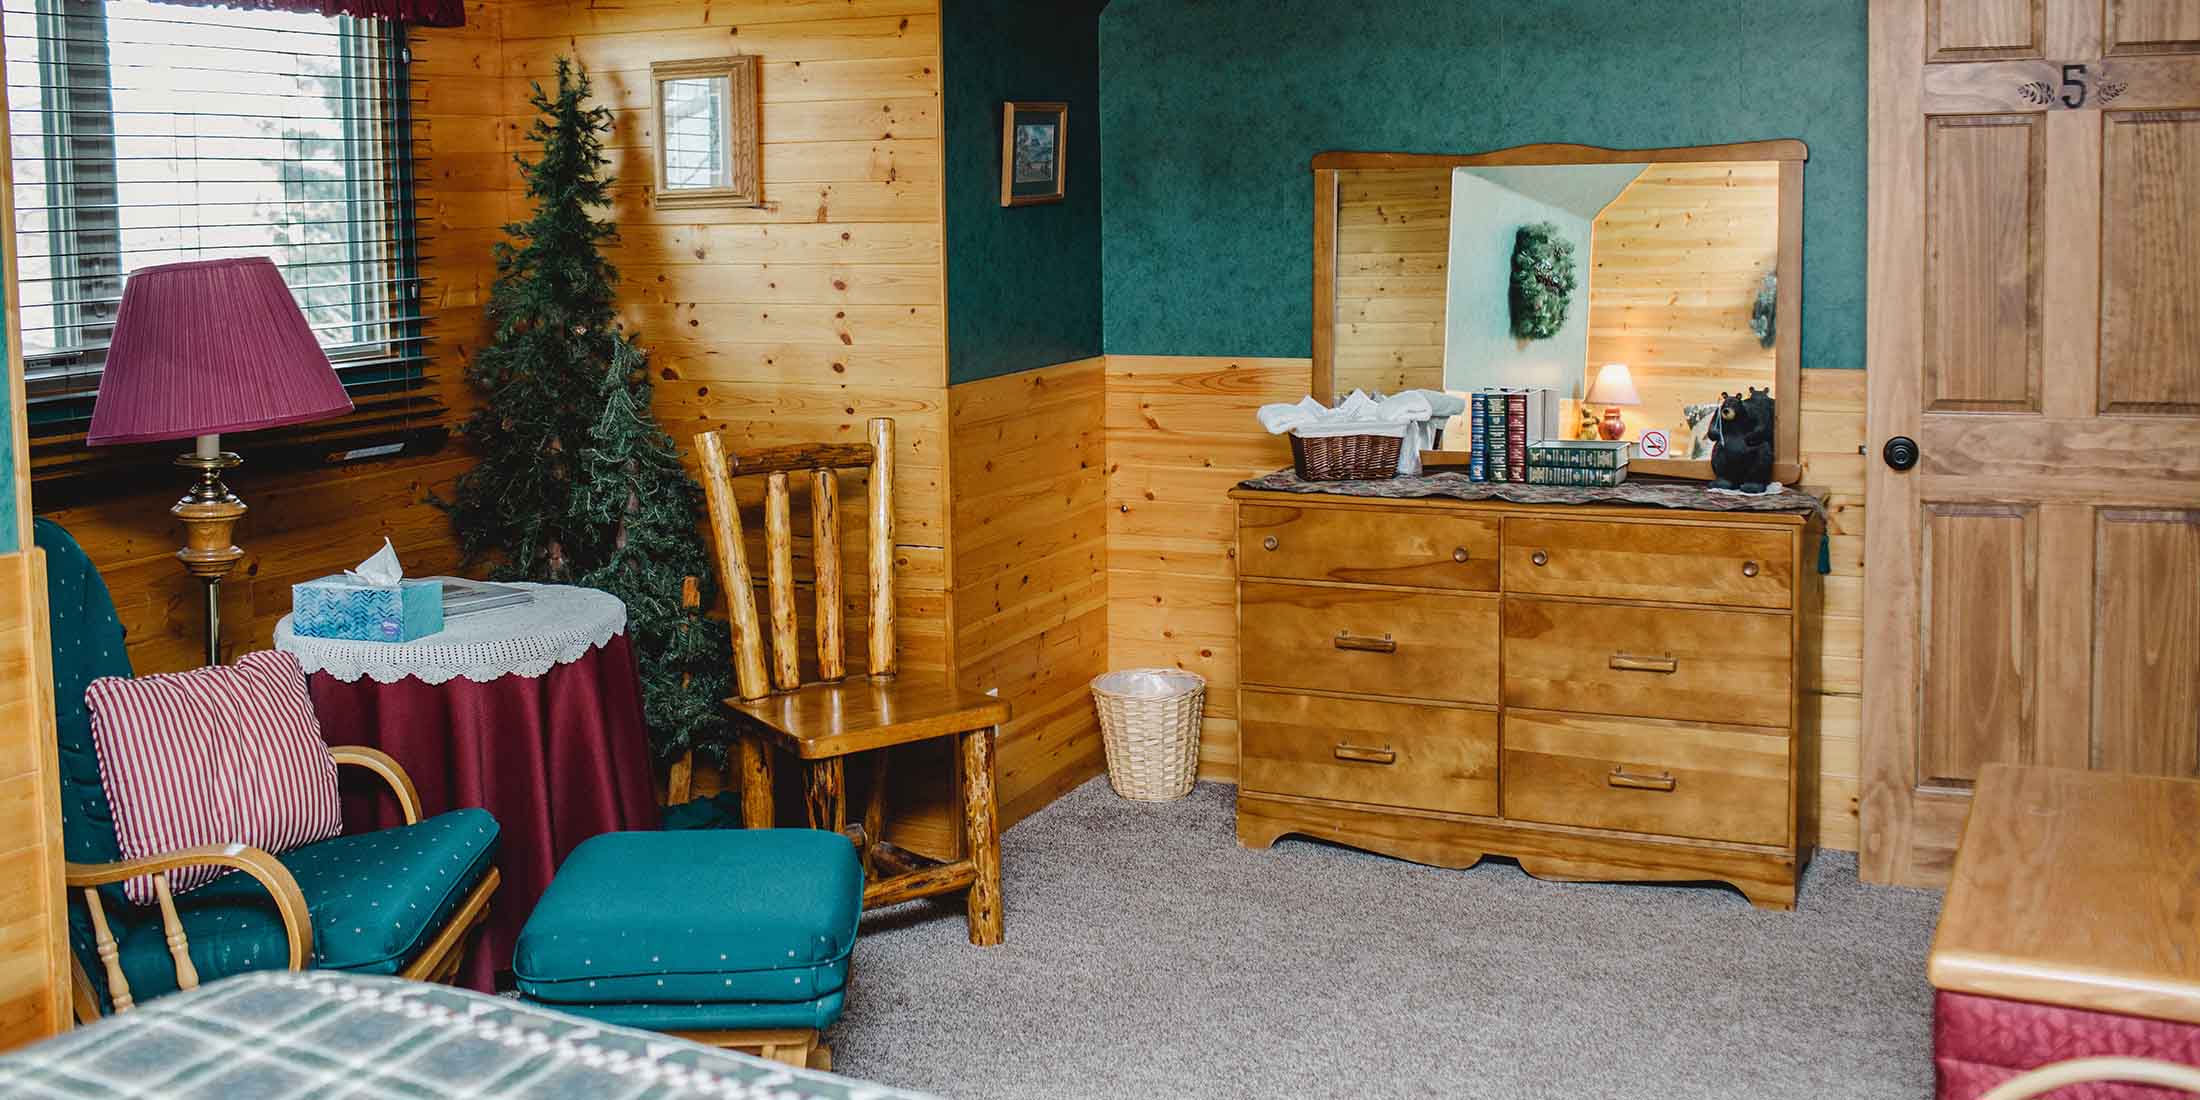 The Emerald Room at Rocky Ridge Country Lodge